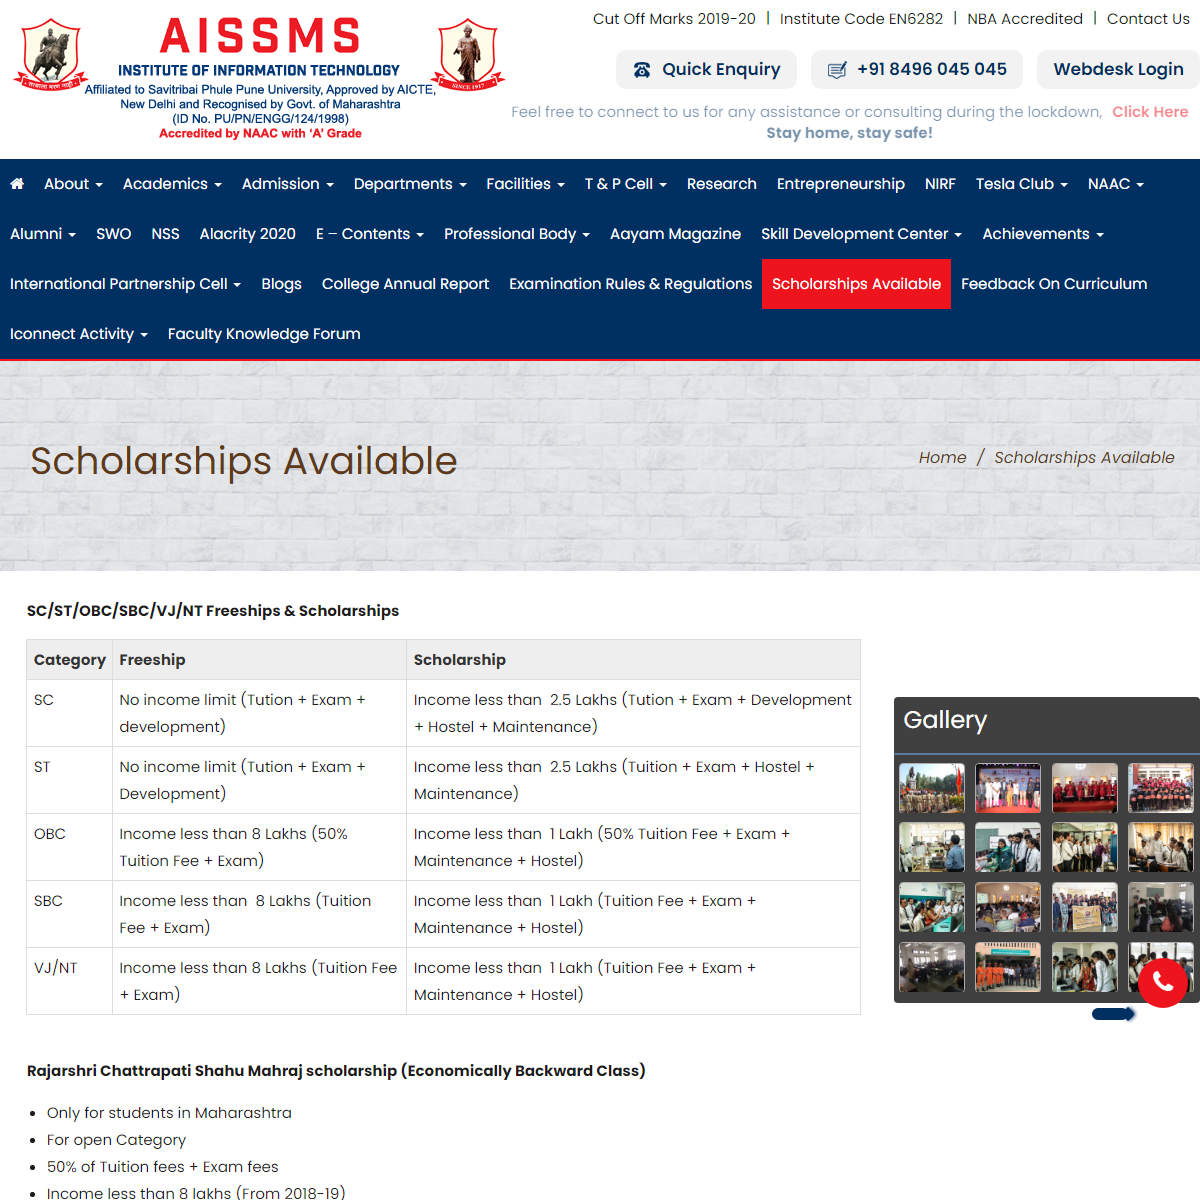 A complete backup of https://aissmsioit.org/scholarships-available/